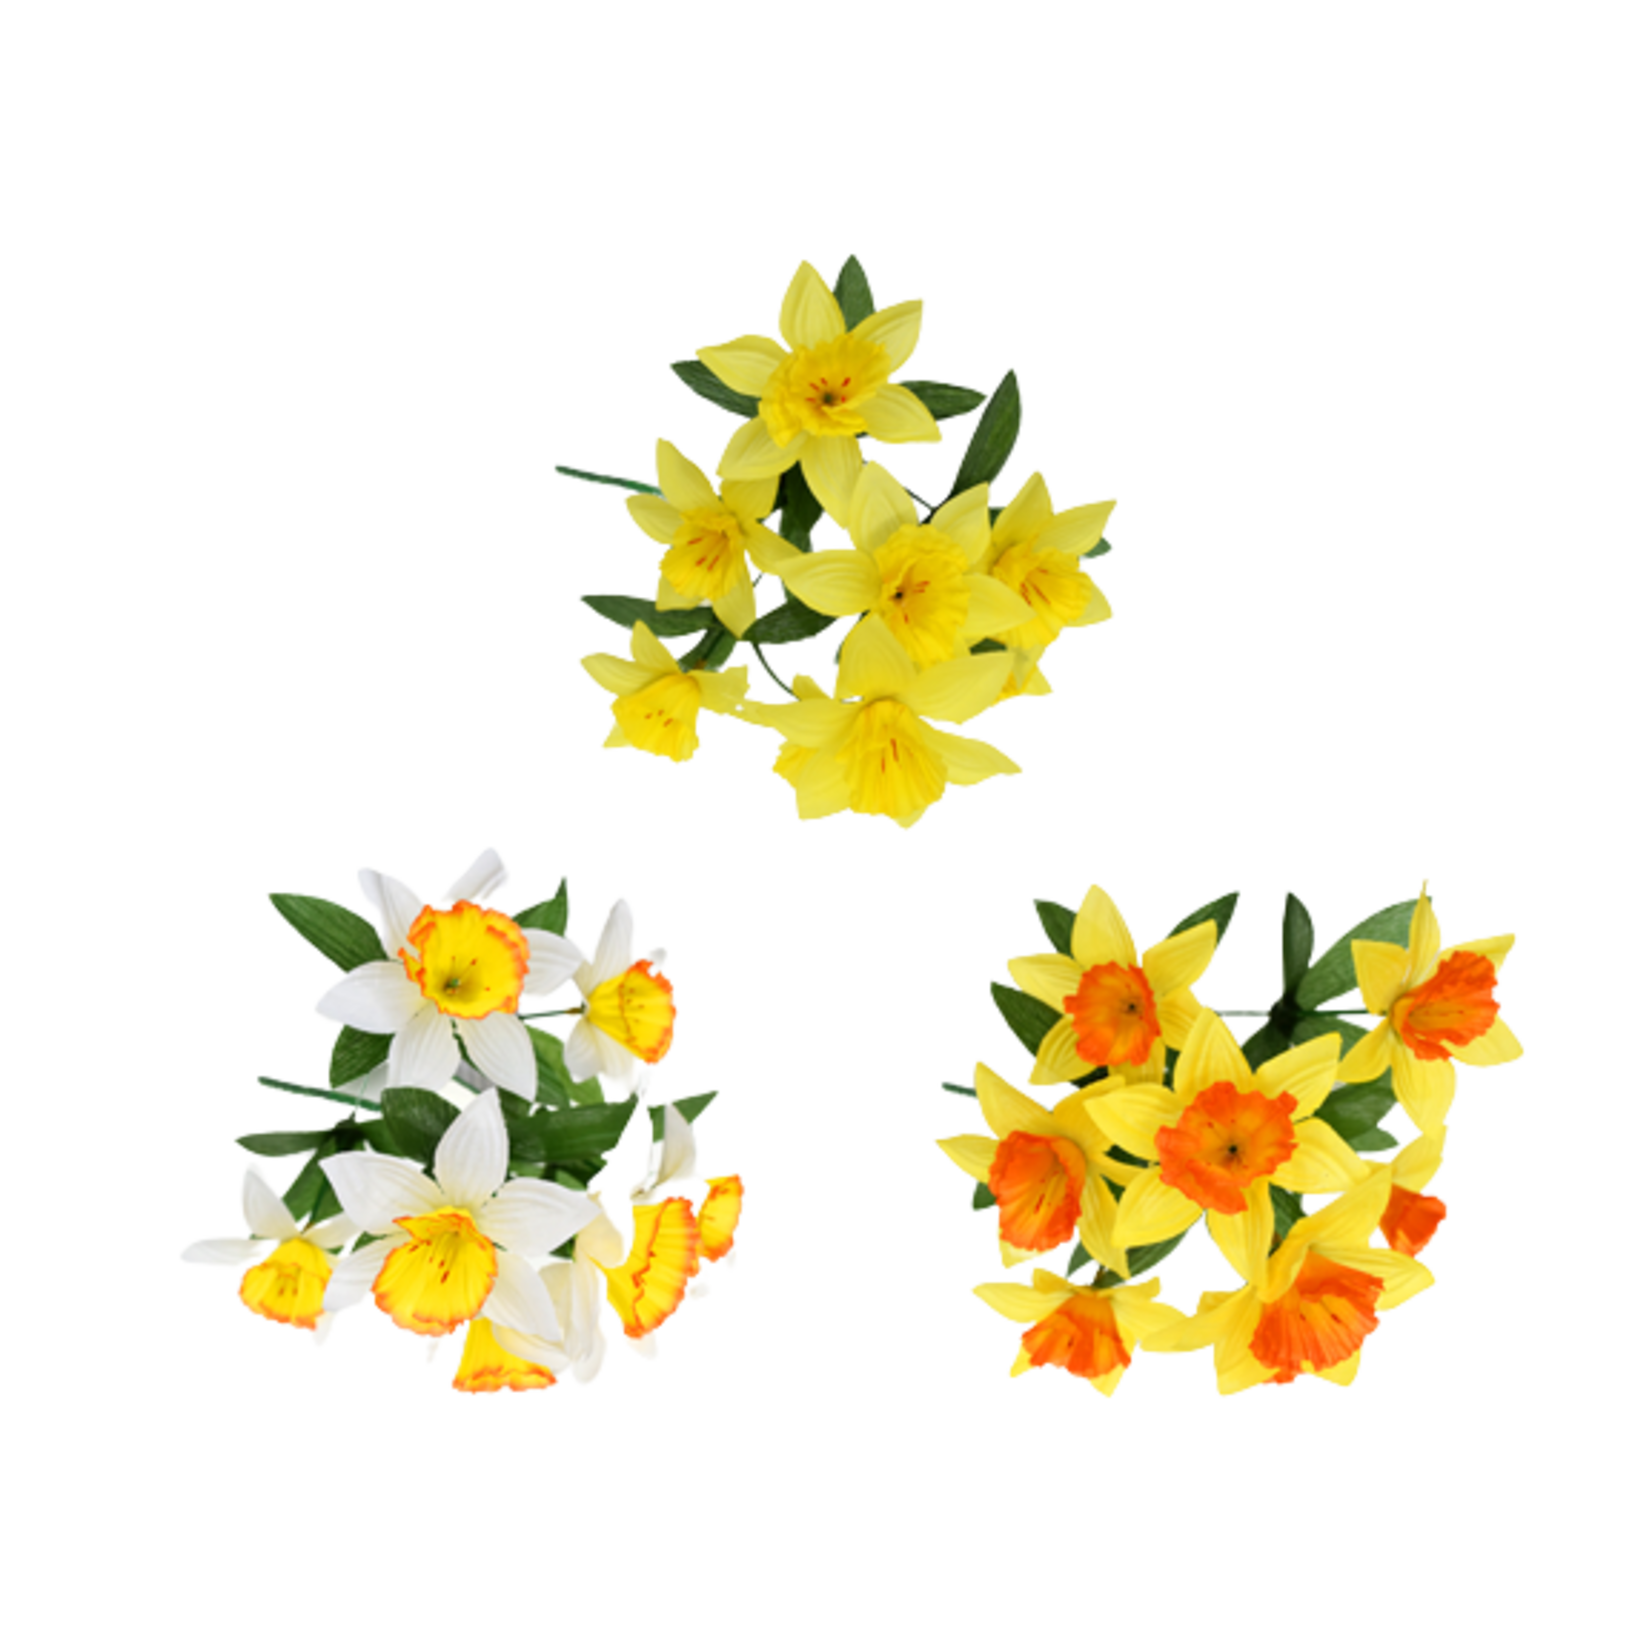 DAFFODIL BUSH - YELLOW AND YELLOW, WHITE AND YELLOW, OR ORANGE AND YELLOW